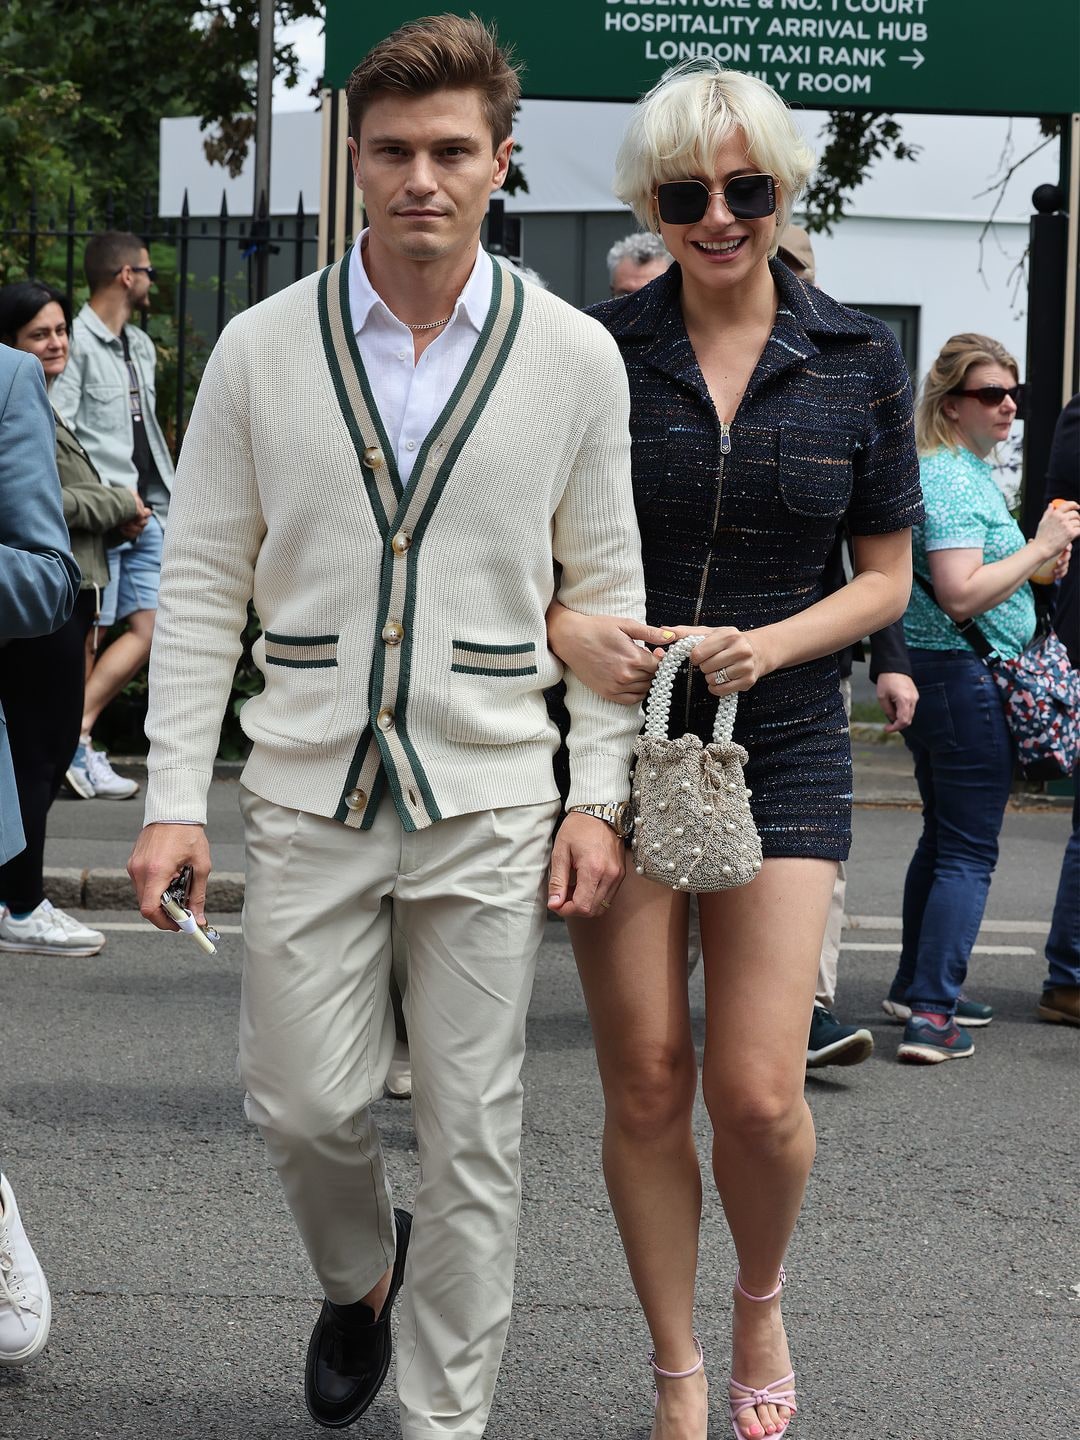 Pixie Lott and Oliver Cheshire attend the Evian Suite on day one of the Wimbledon Tennis Championships 